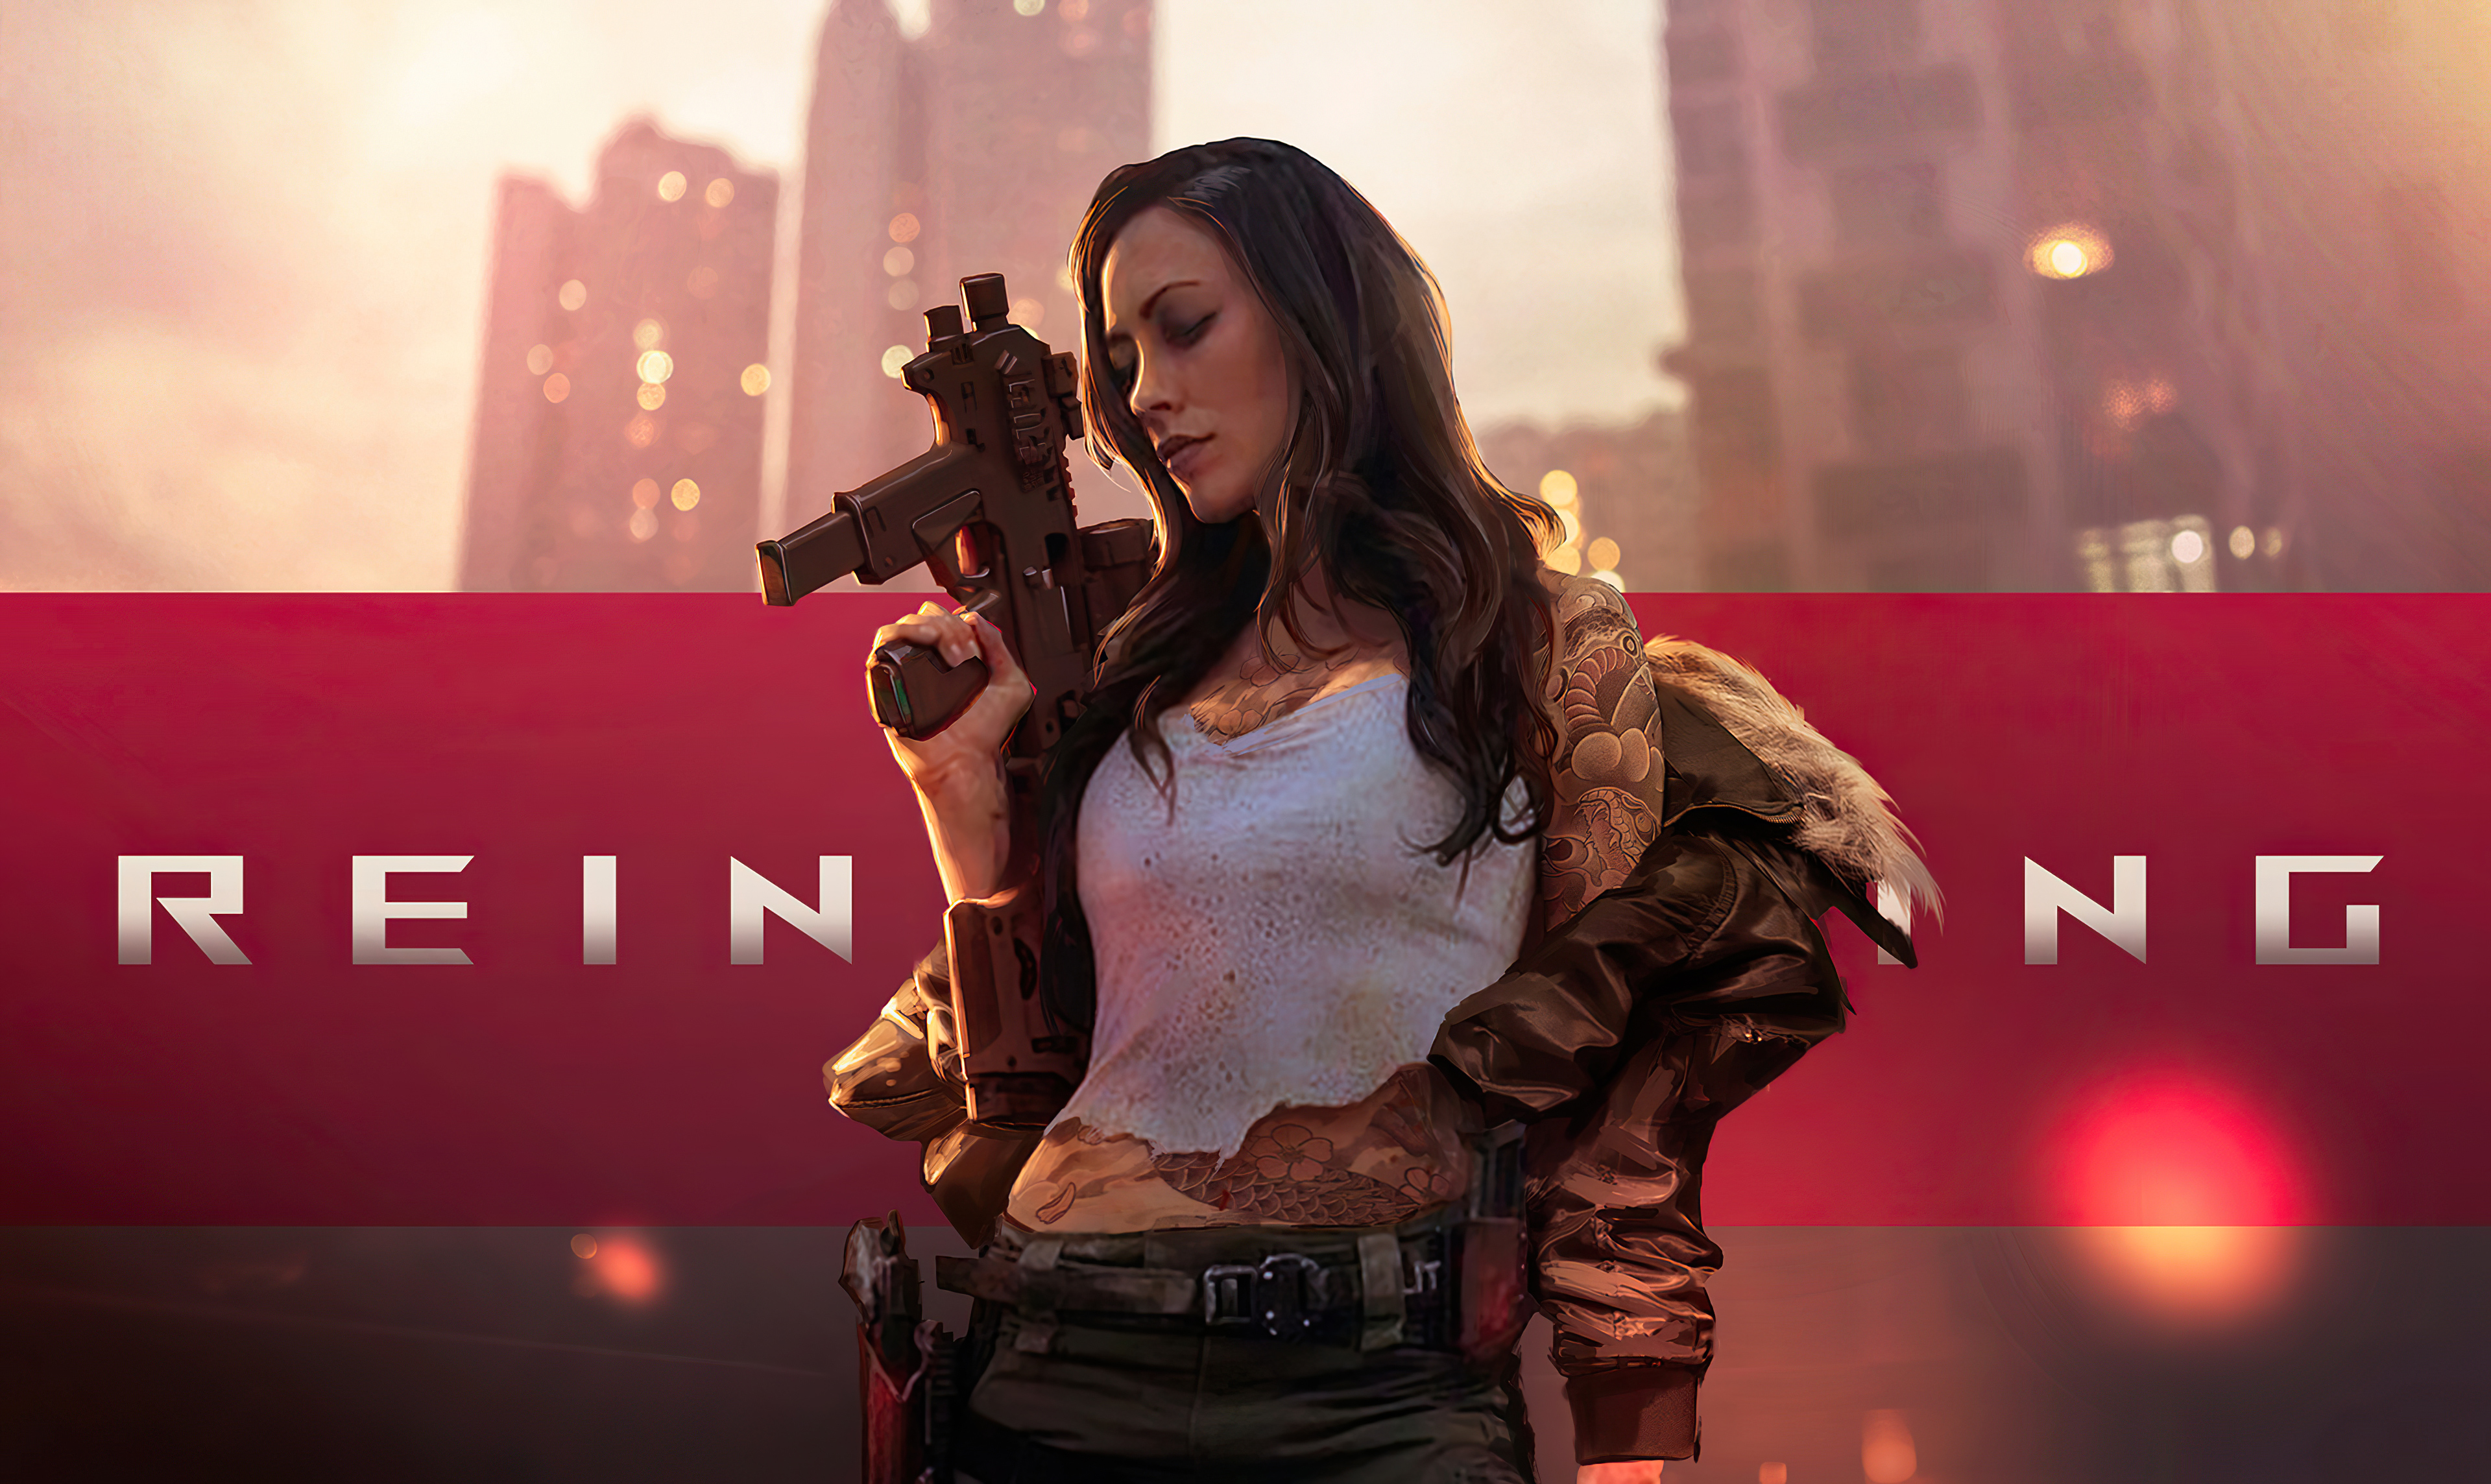 The girl with the machine gun from the game